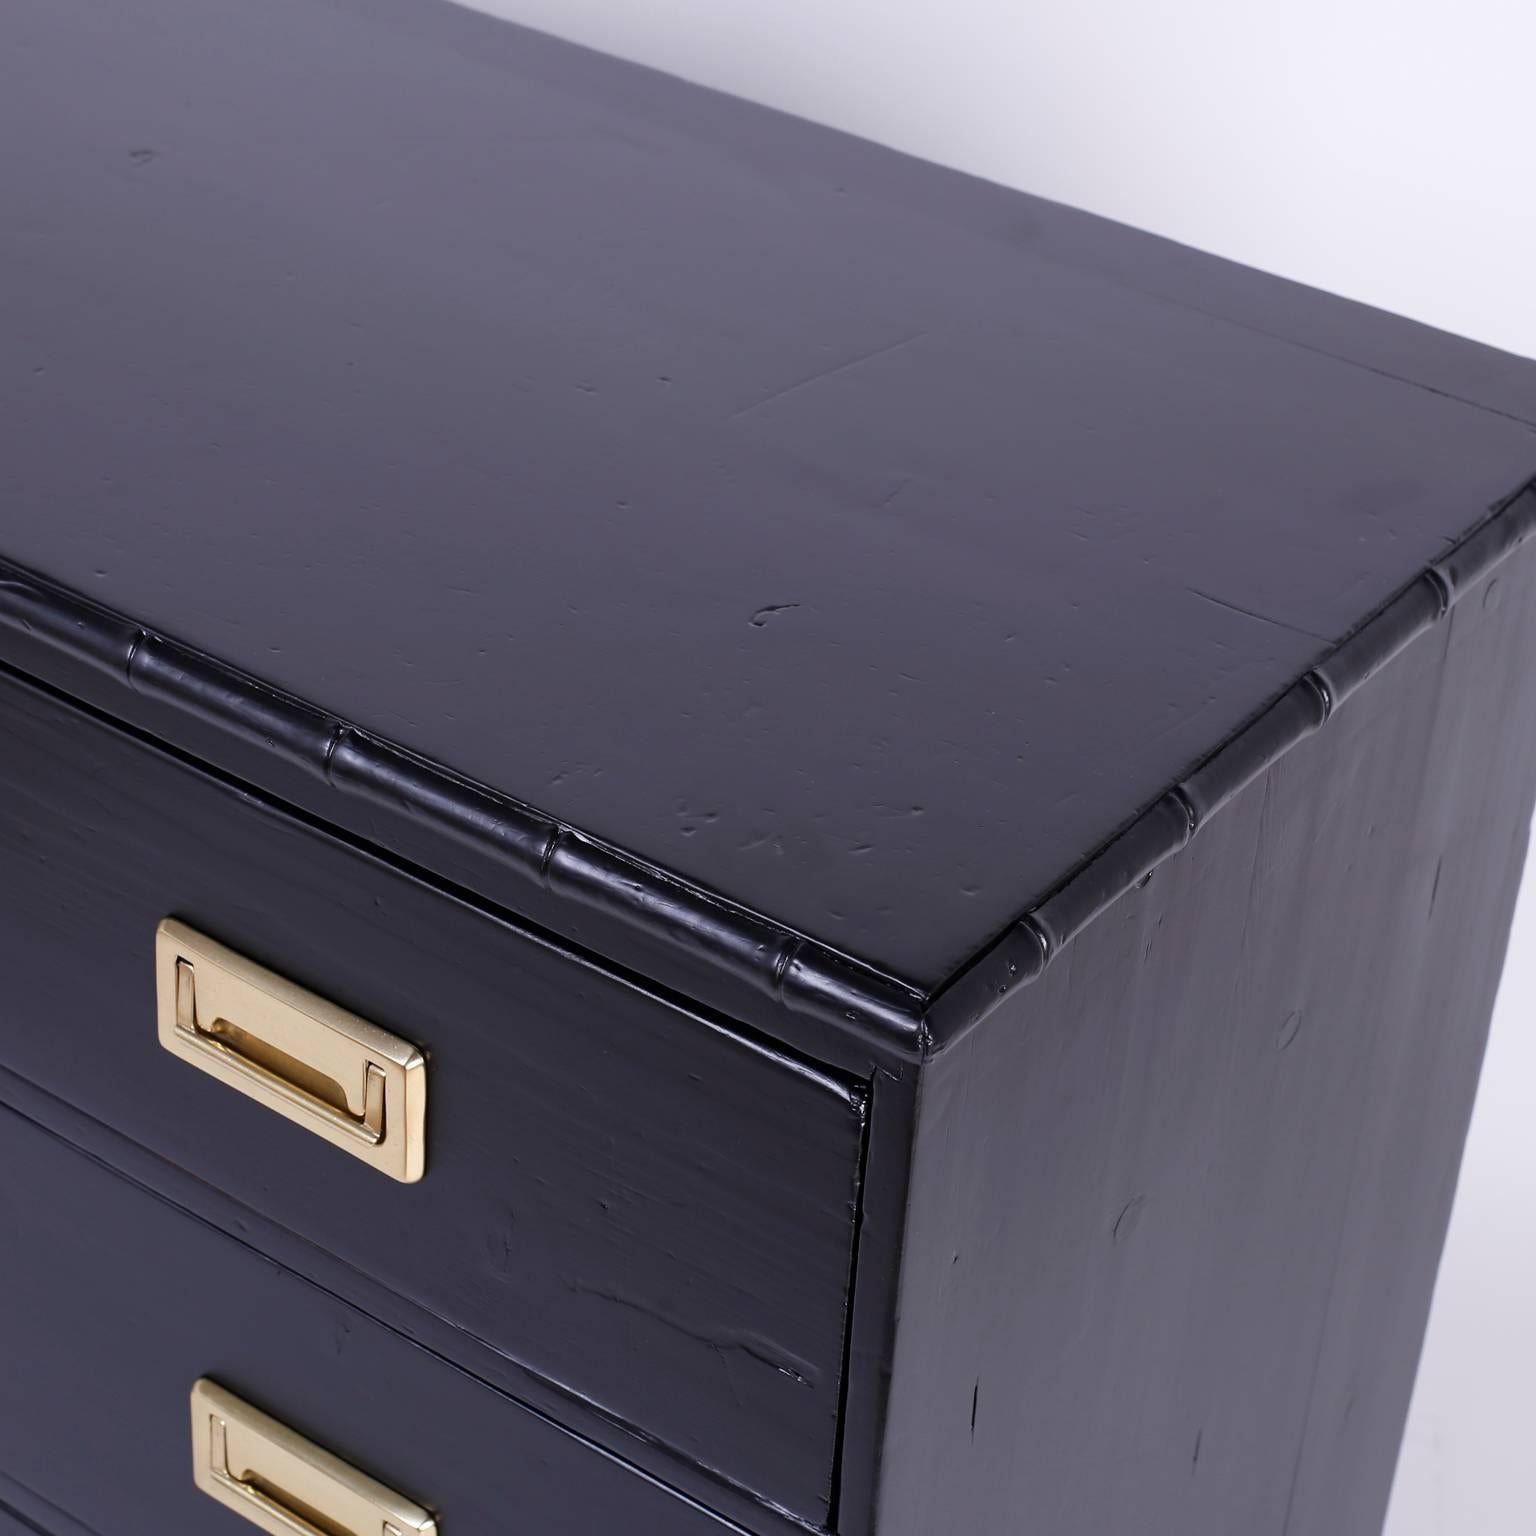 19th Century 19th C. Ebonized Finish Campaign Style Chest of Drawers with Faux Bamboo Trim